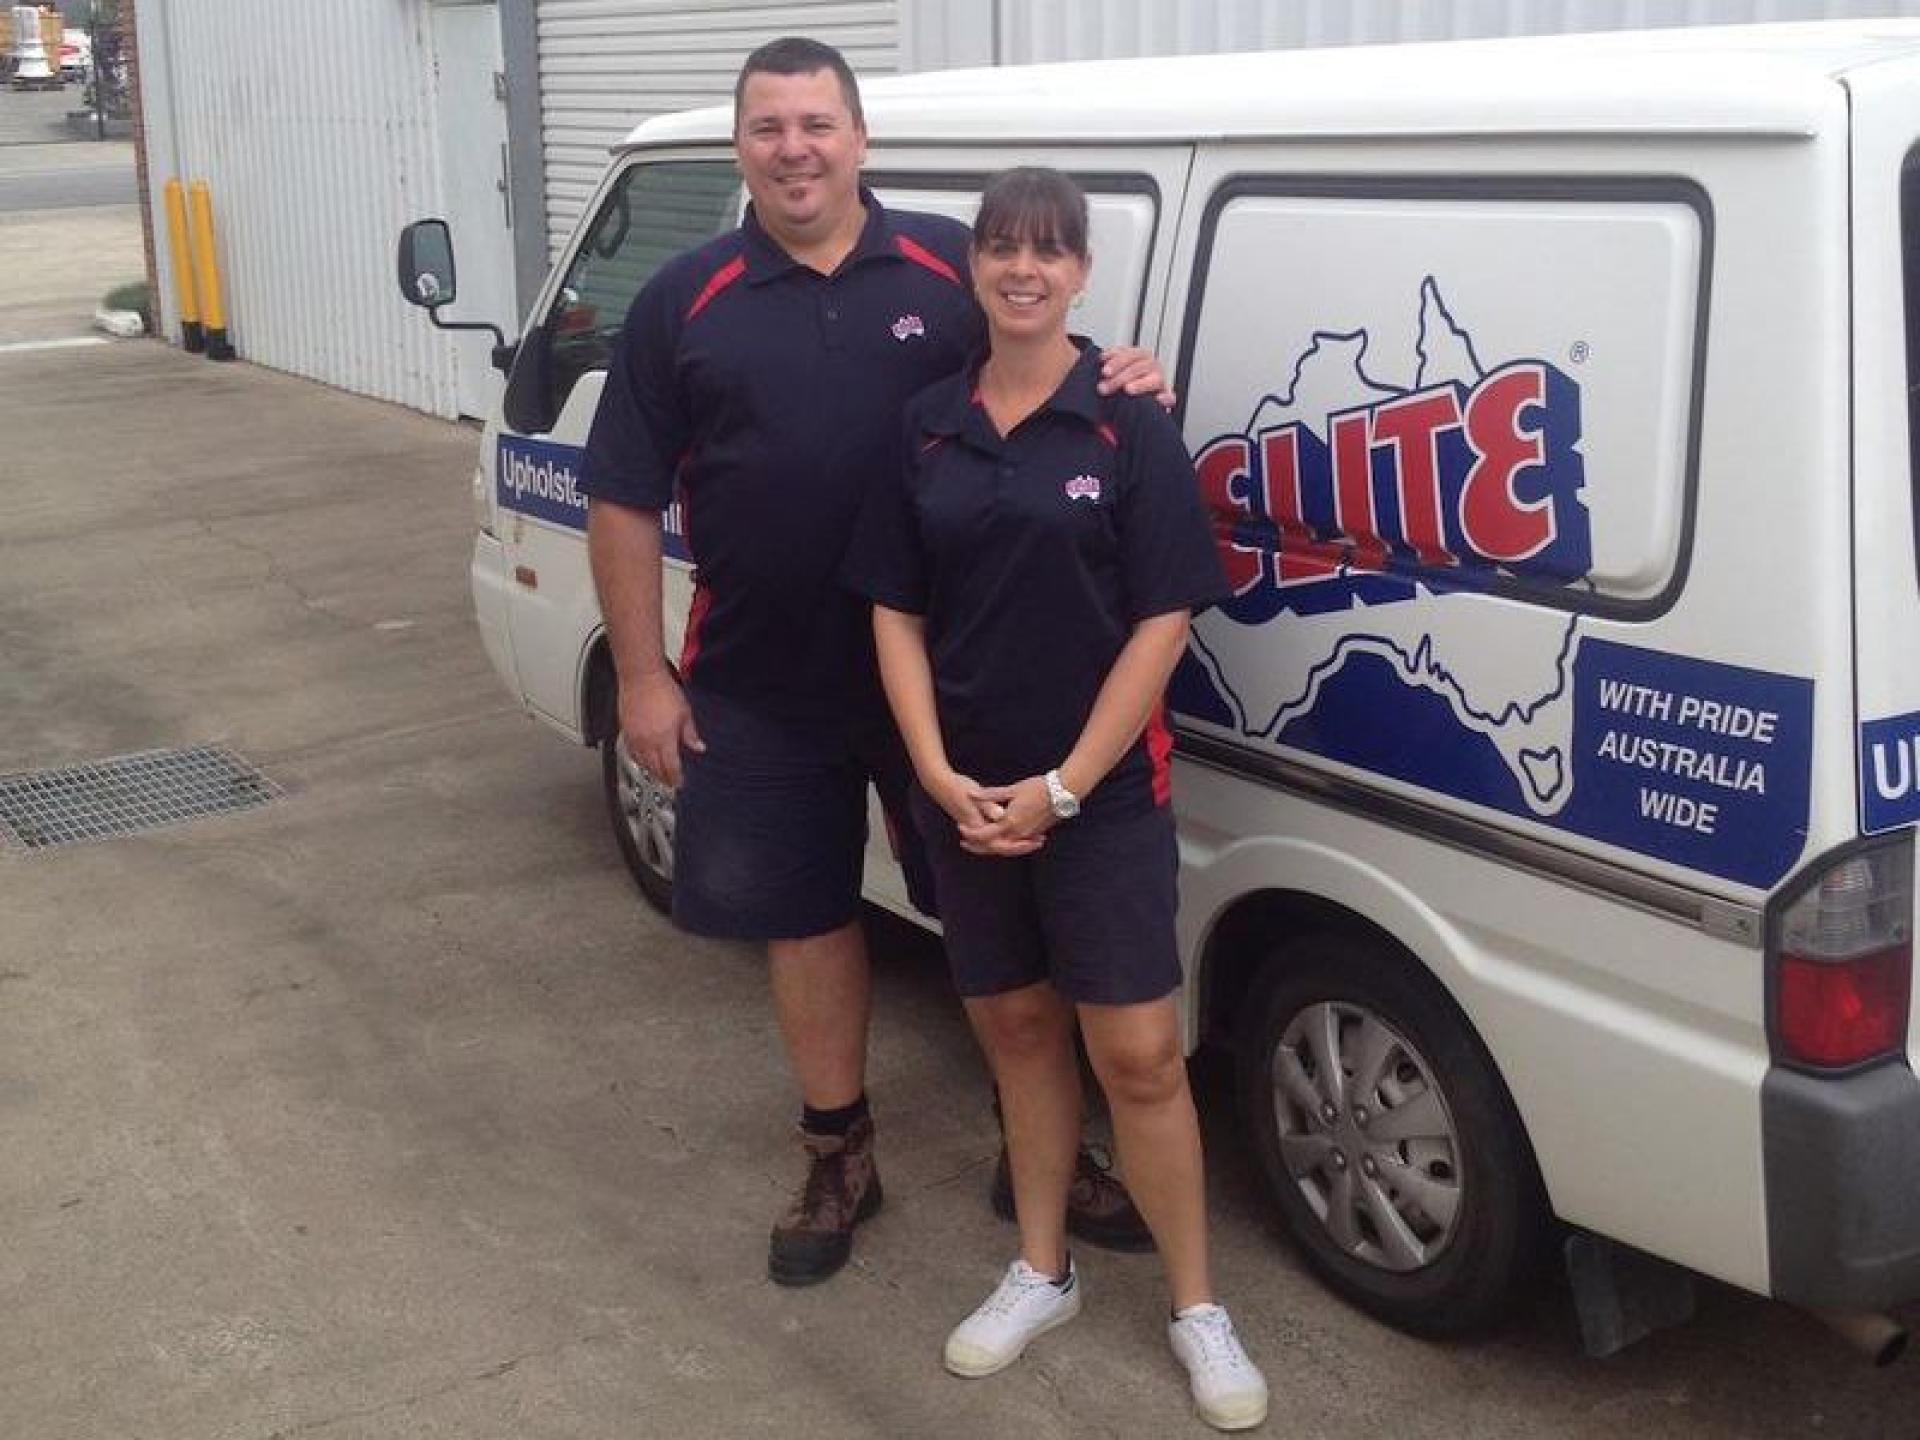 Carpet Cleaning Business for Sale in NSW